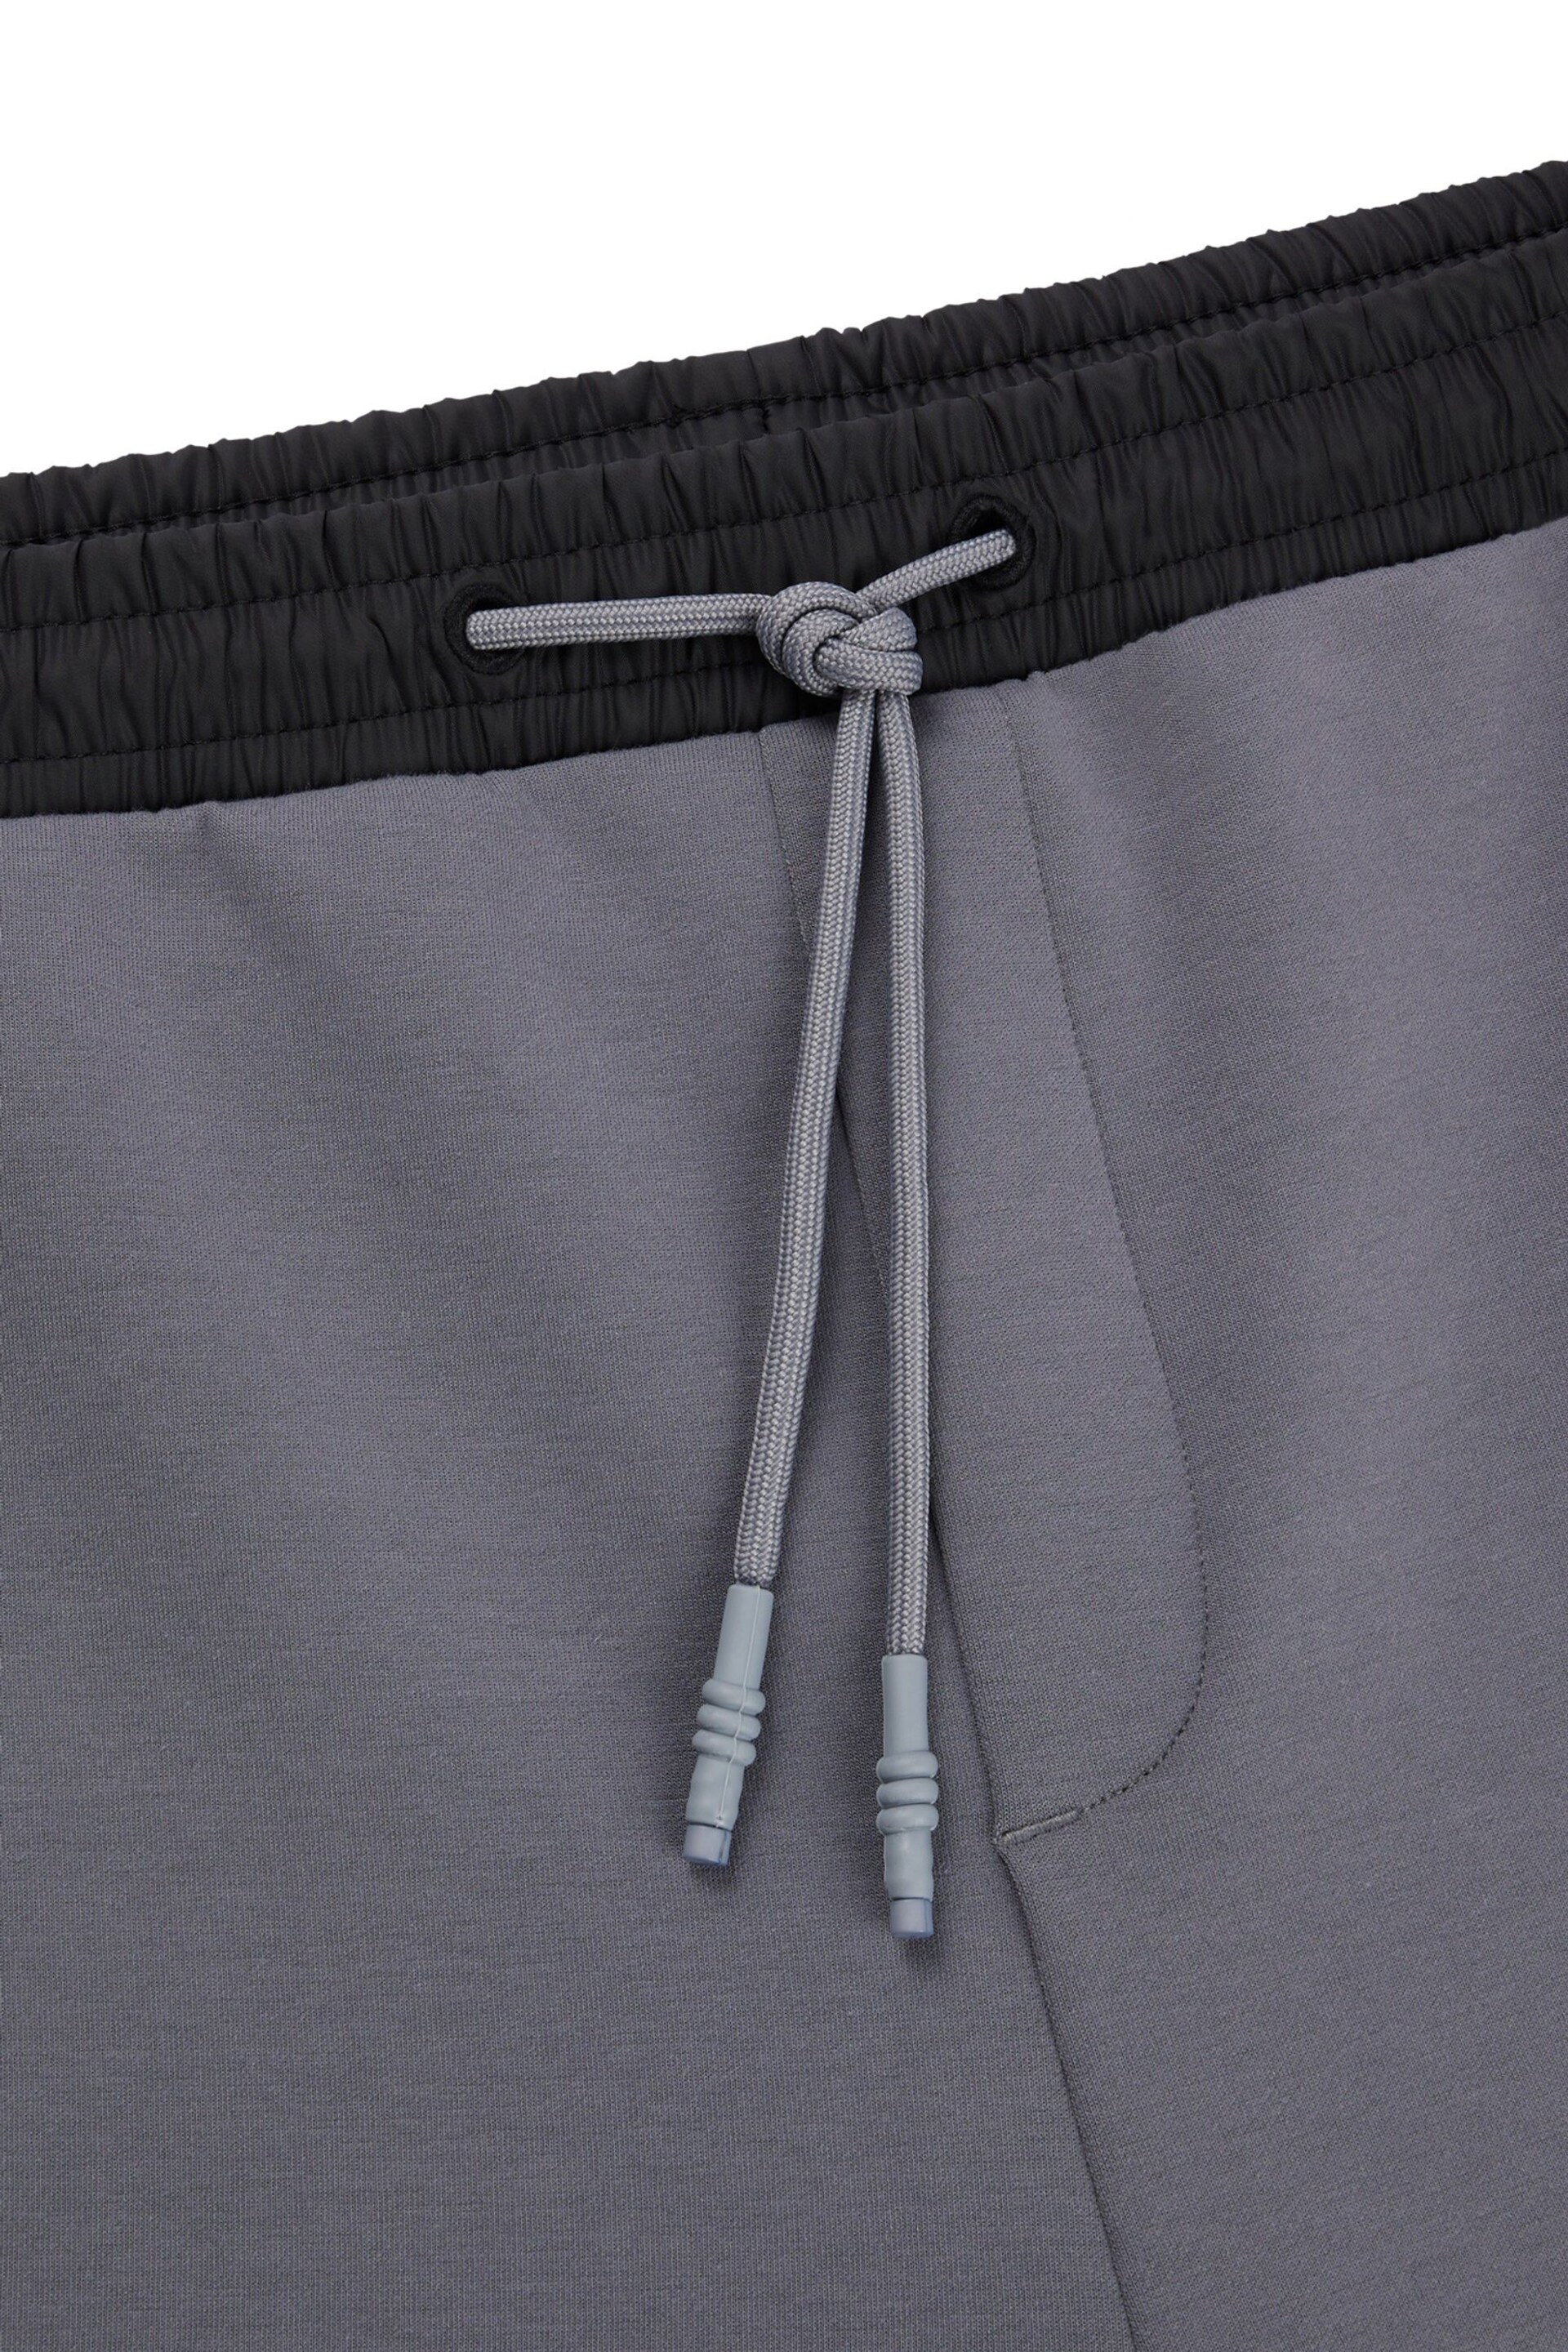 BOSS Grey Relaxed Fit Contrast Panel Sporty Joggers - Image 7 of 7